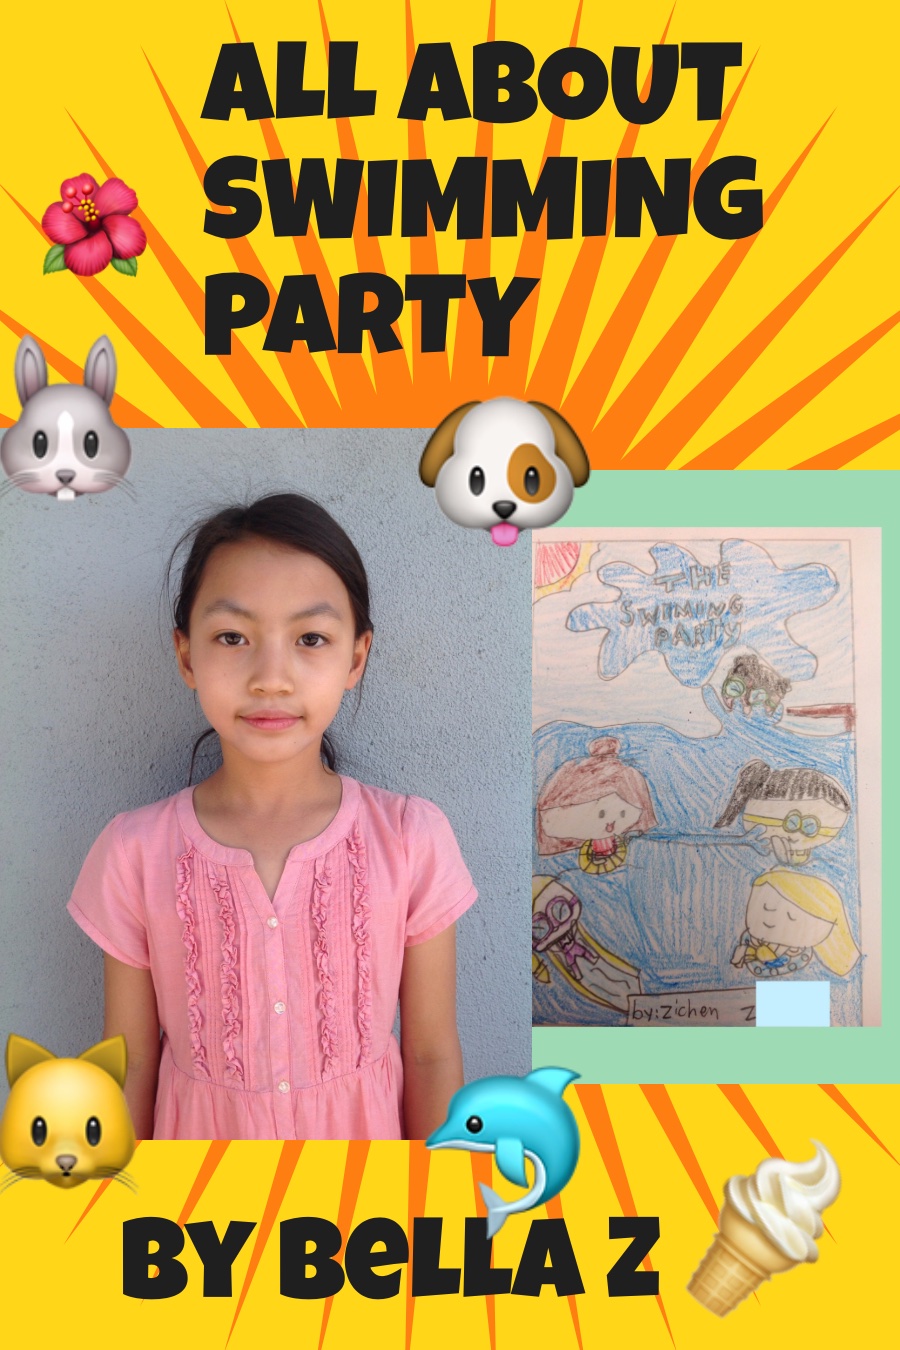 All About The Swimming Party by Bella Z